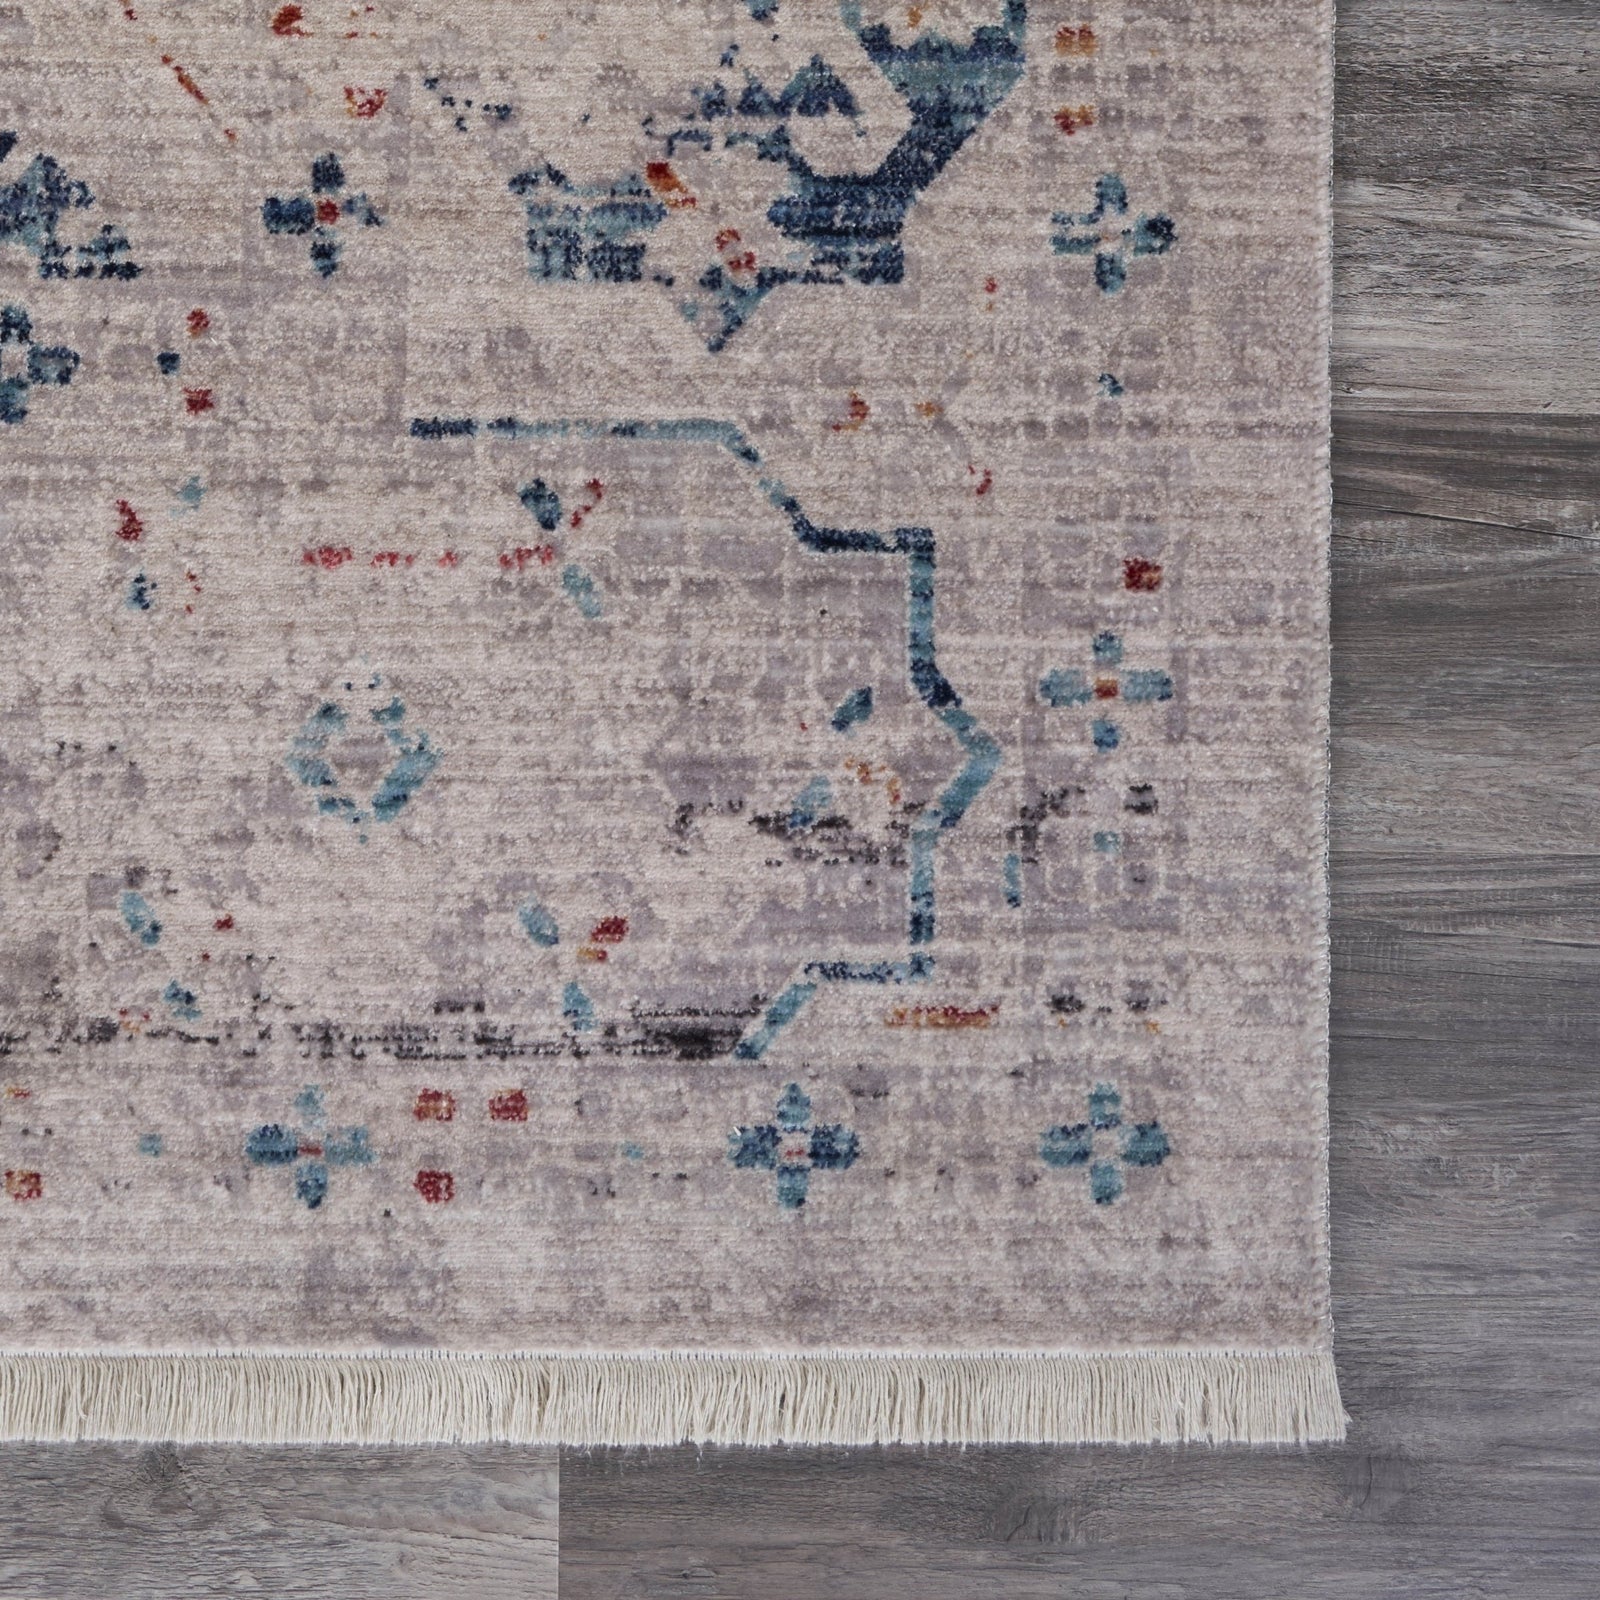 5’ x 8’ Ivory Distressed Floral Area Rug